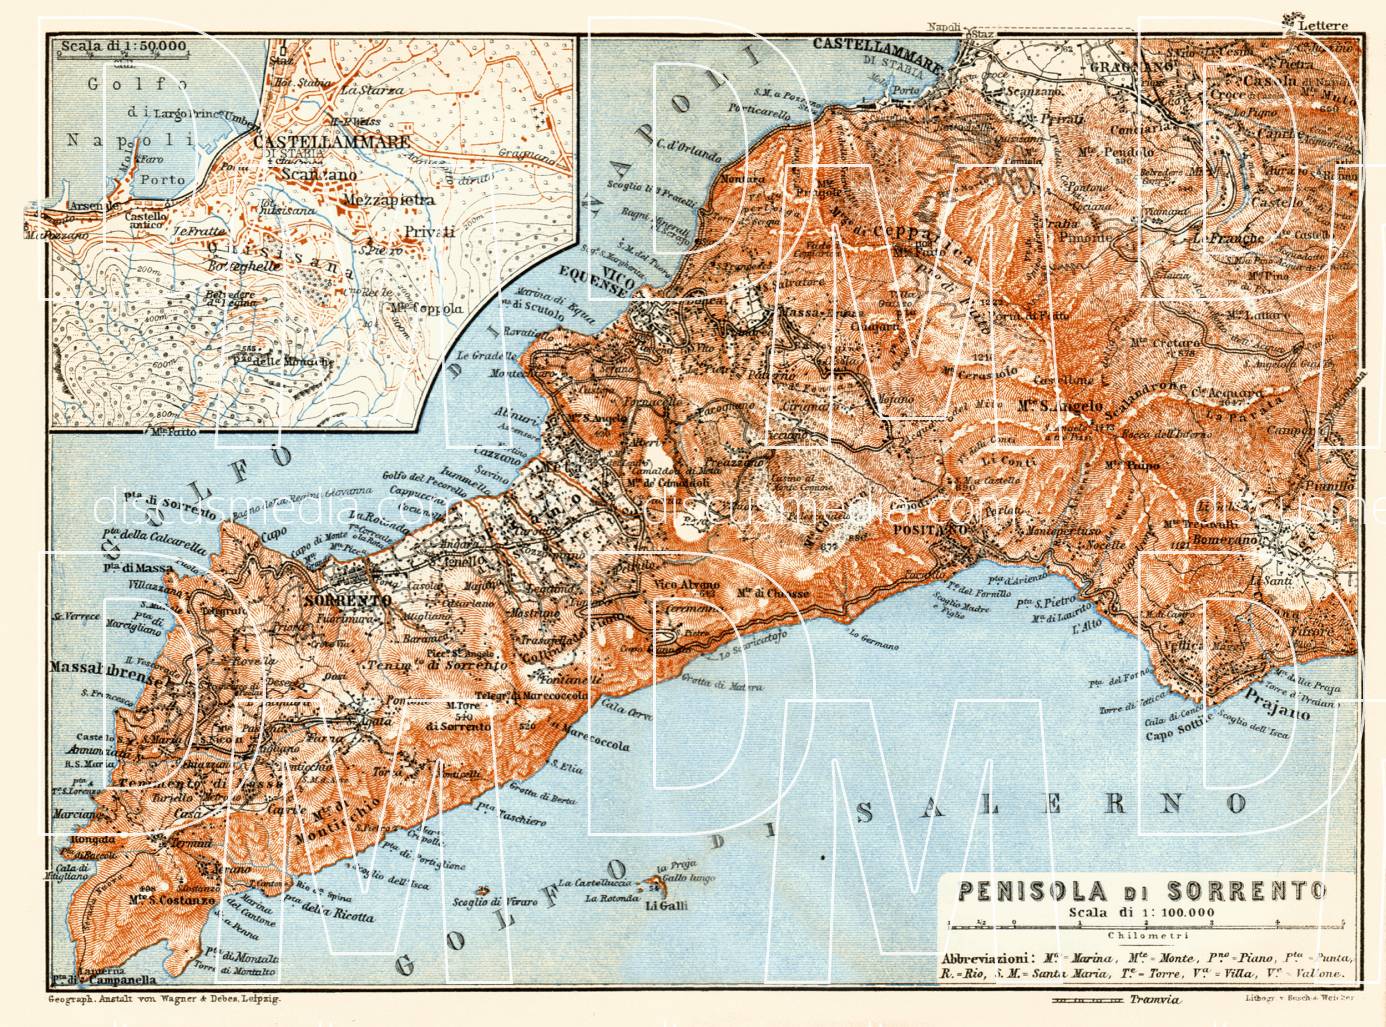 Old map of the Sorrentine Peninsula in 1912. Buy vintage map replica ...